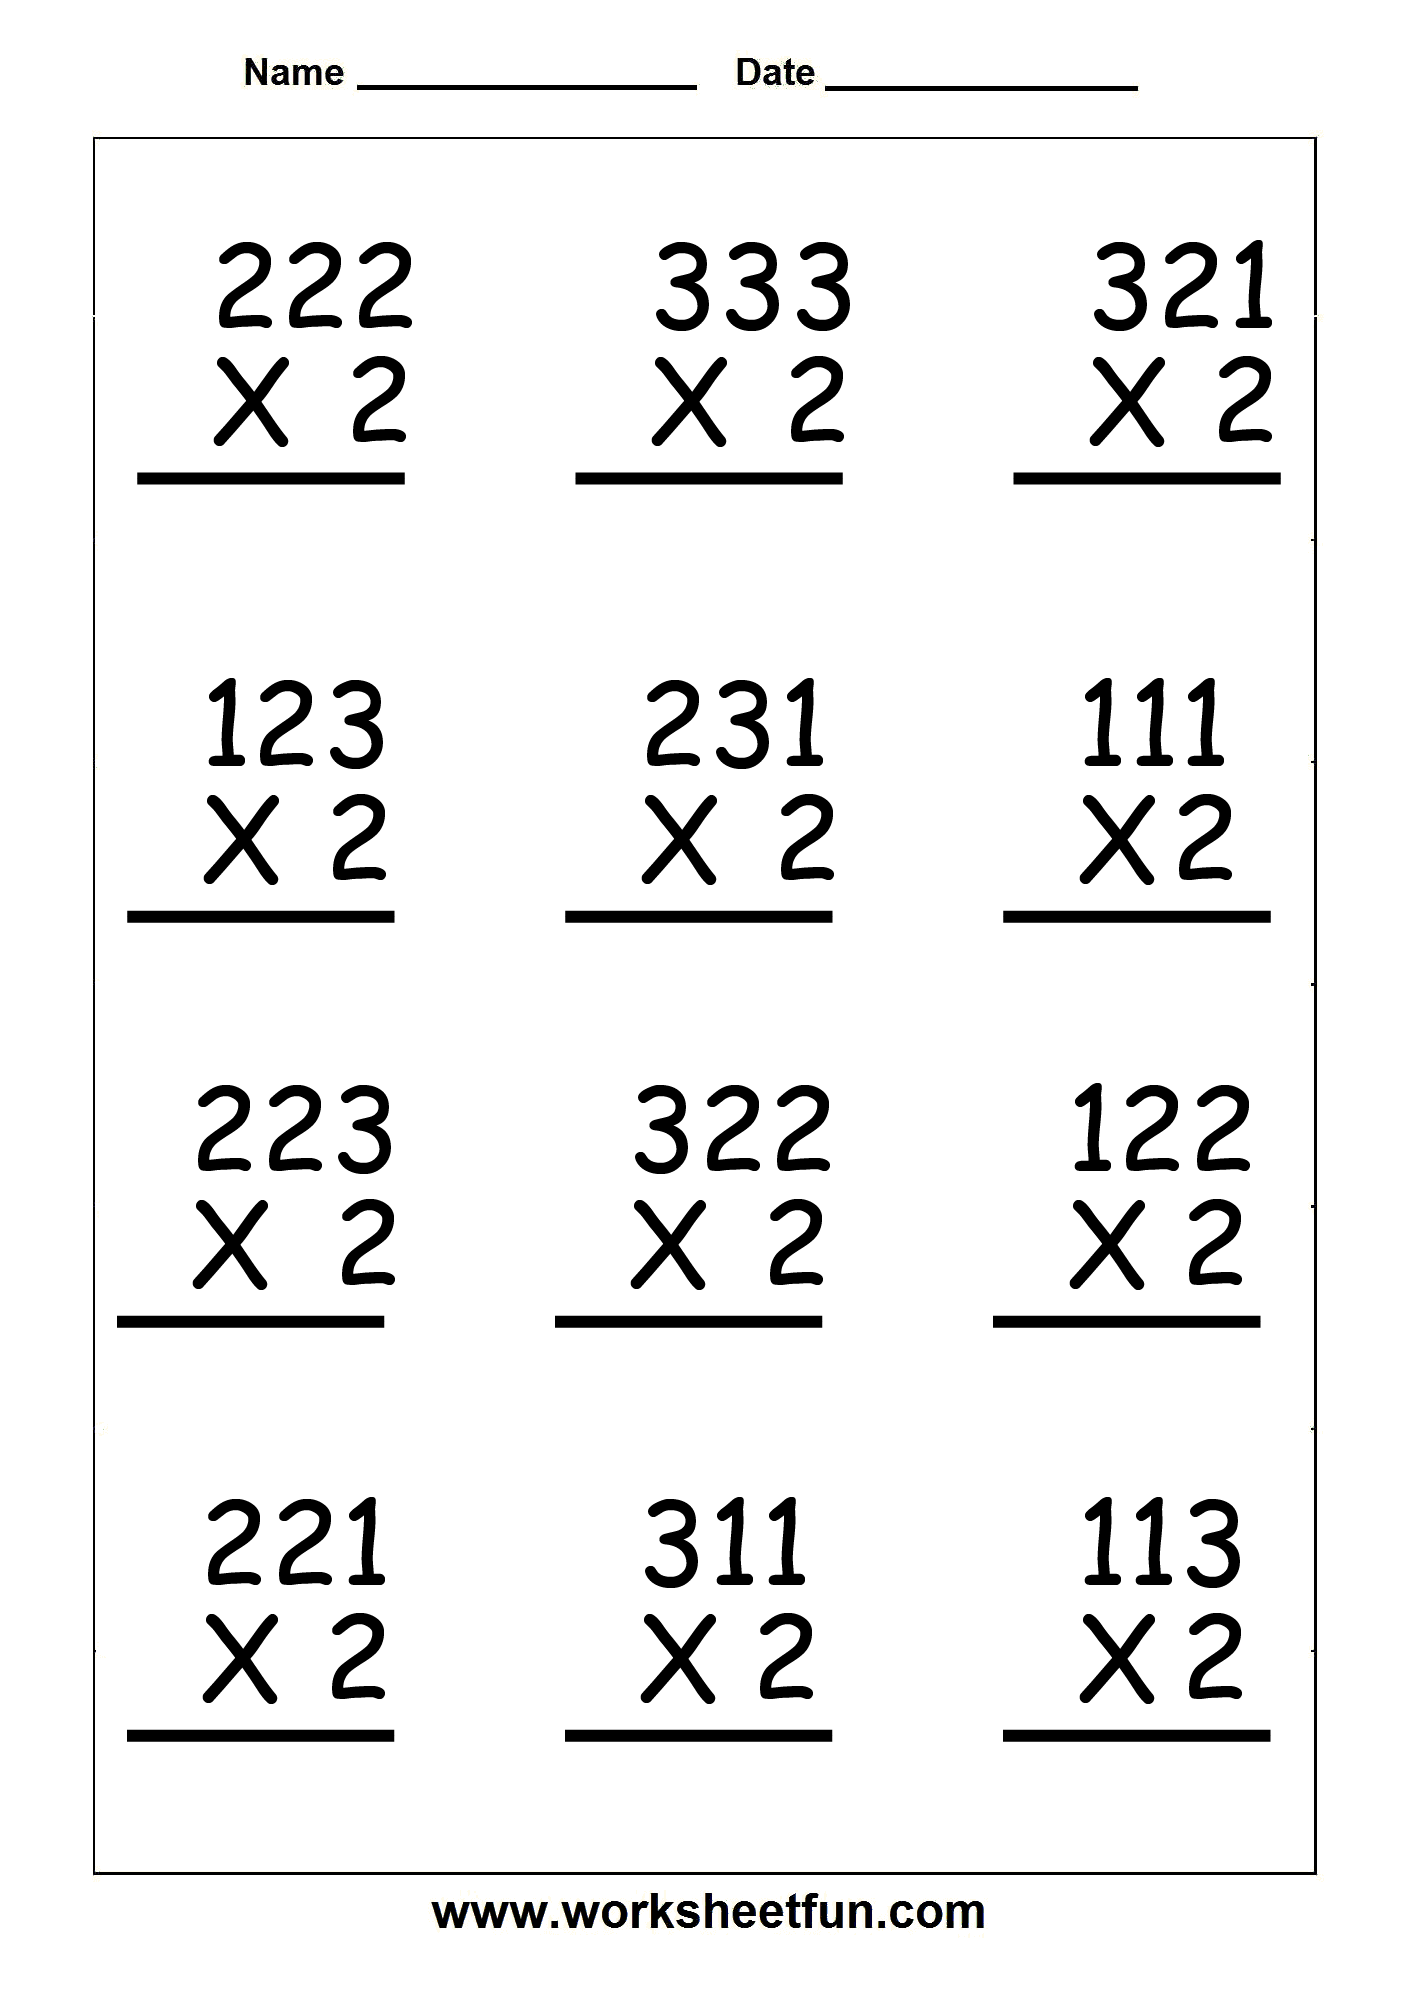 17-best-images-of-three-digit-addition-worksheets-three-digit-addition-and-subtraction